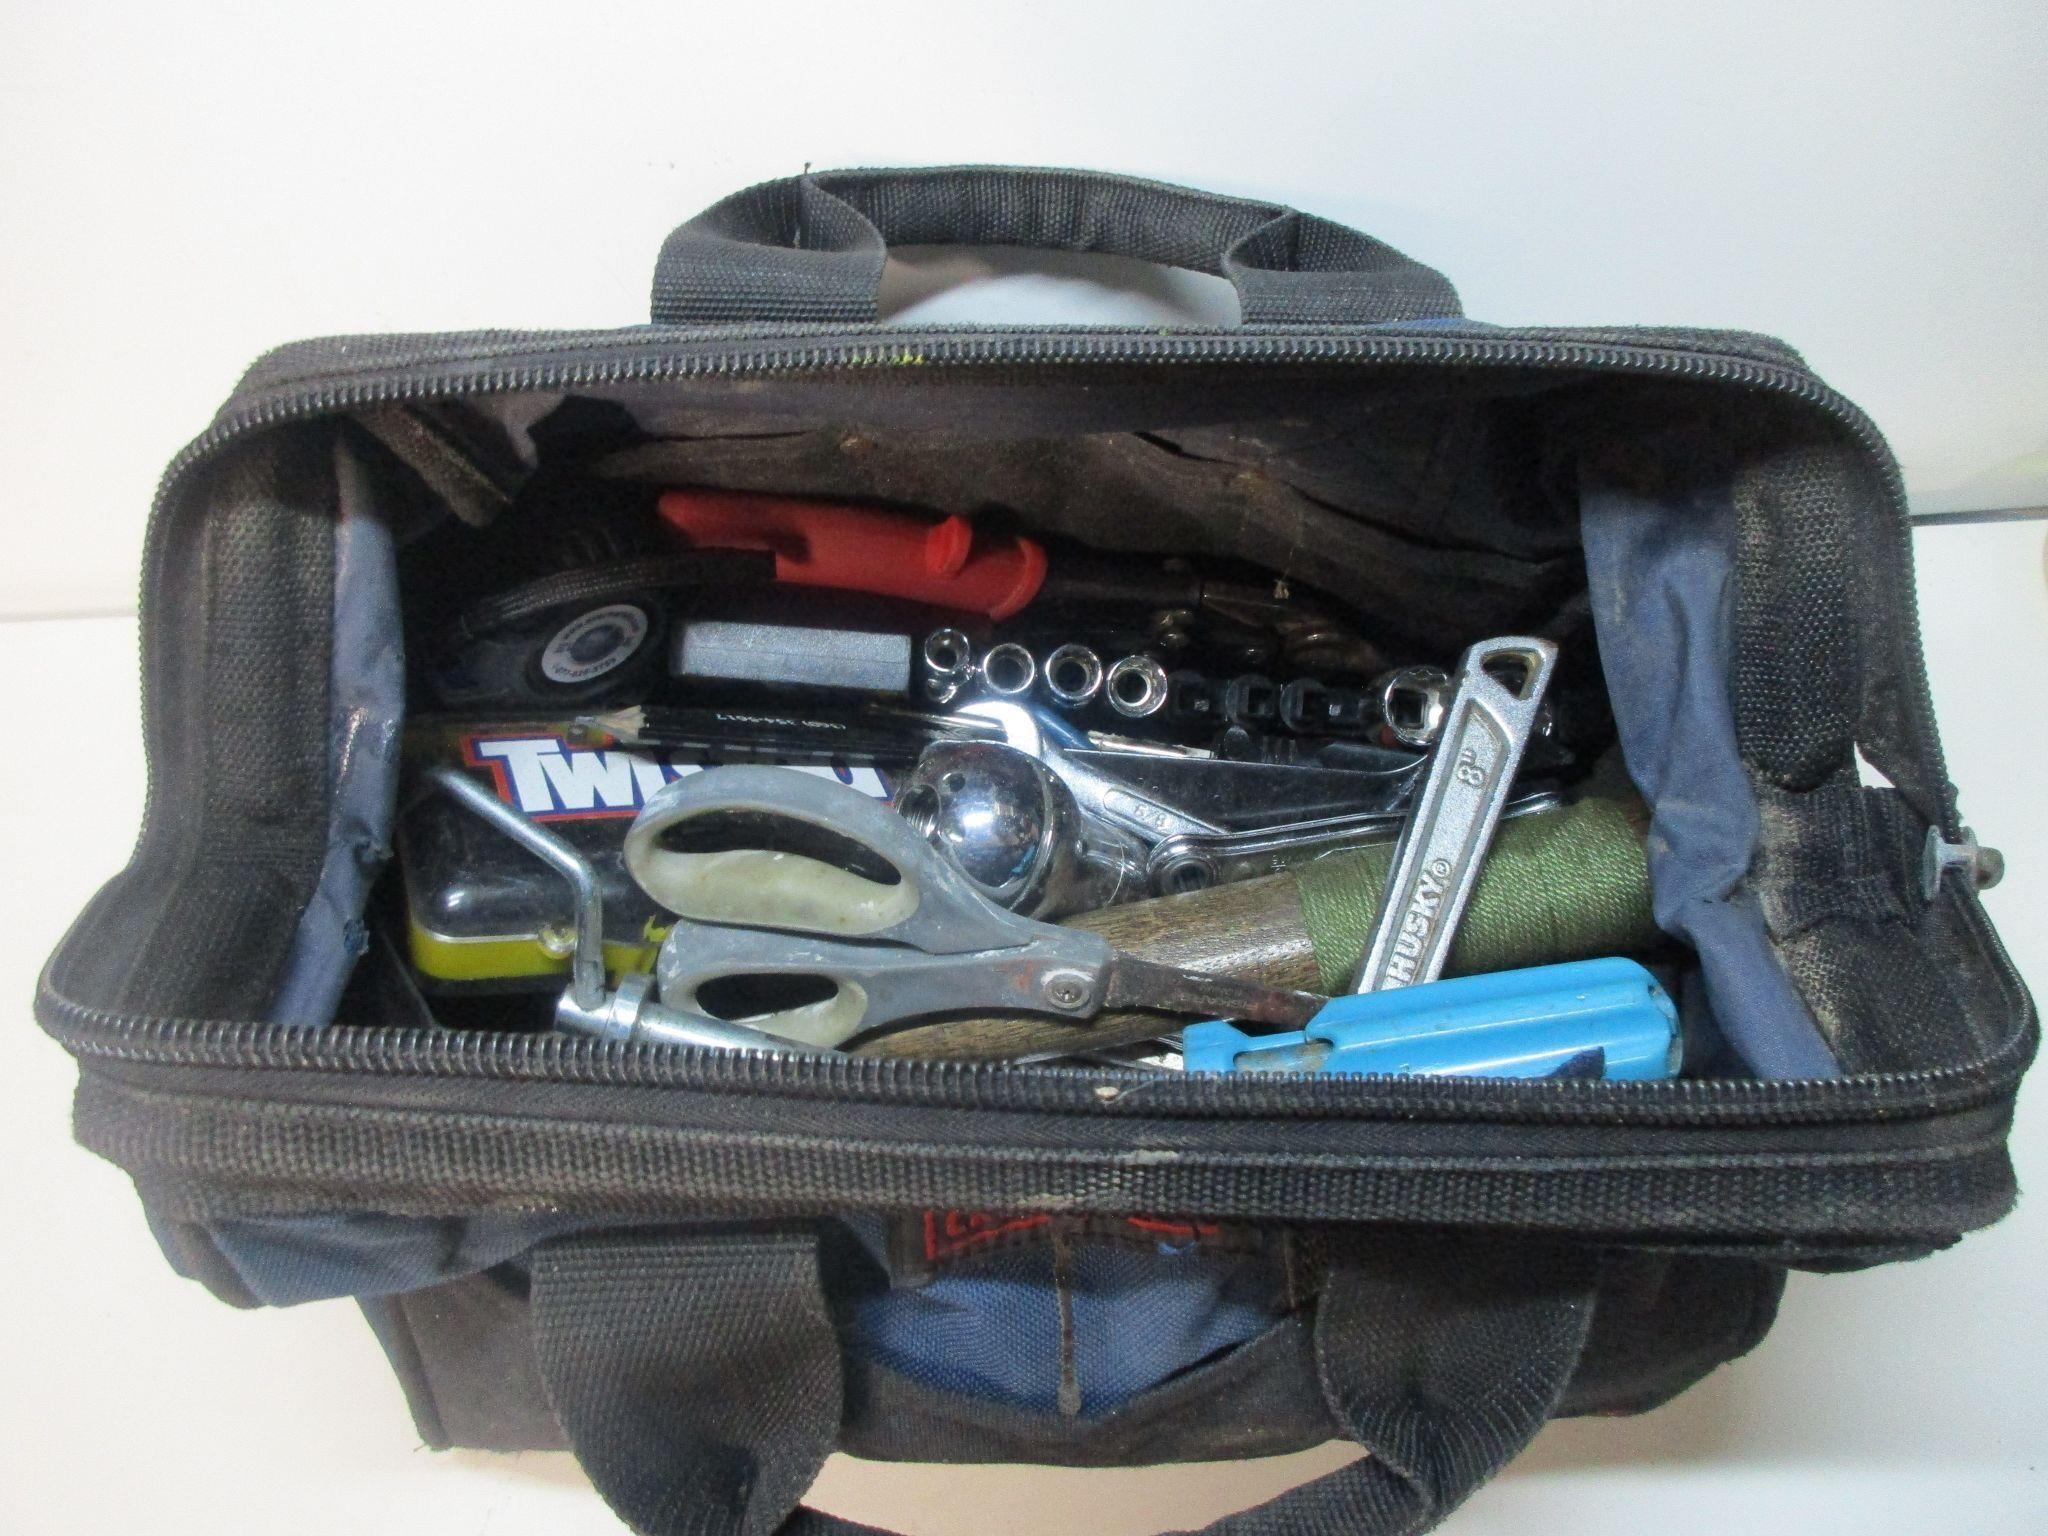 Craftsman Tool bag and Contents